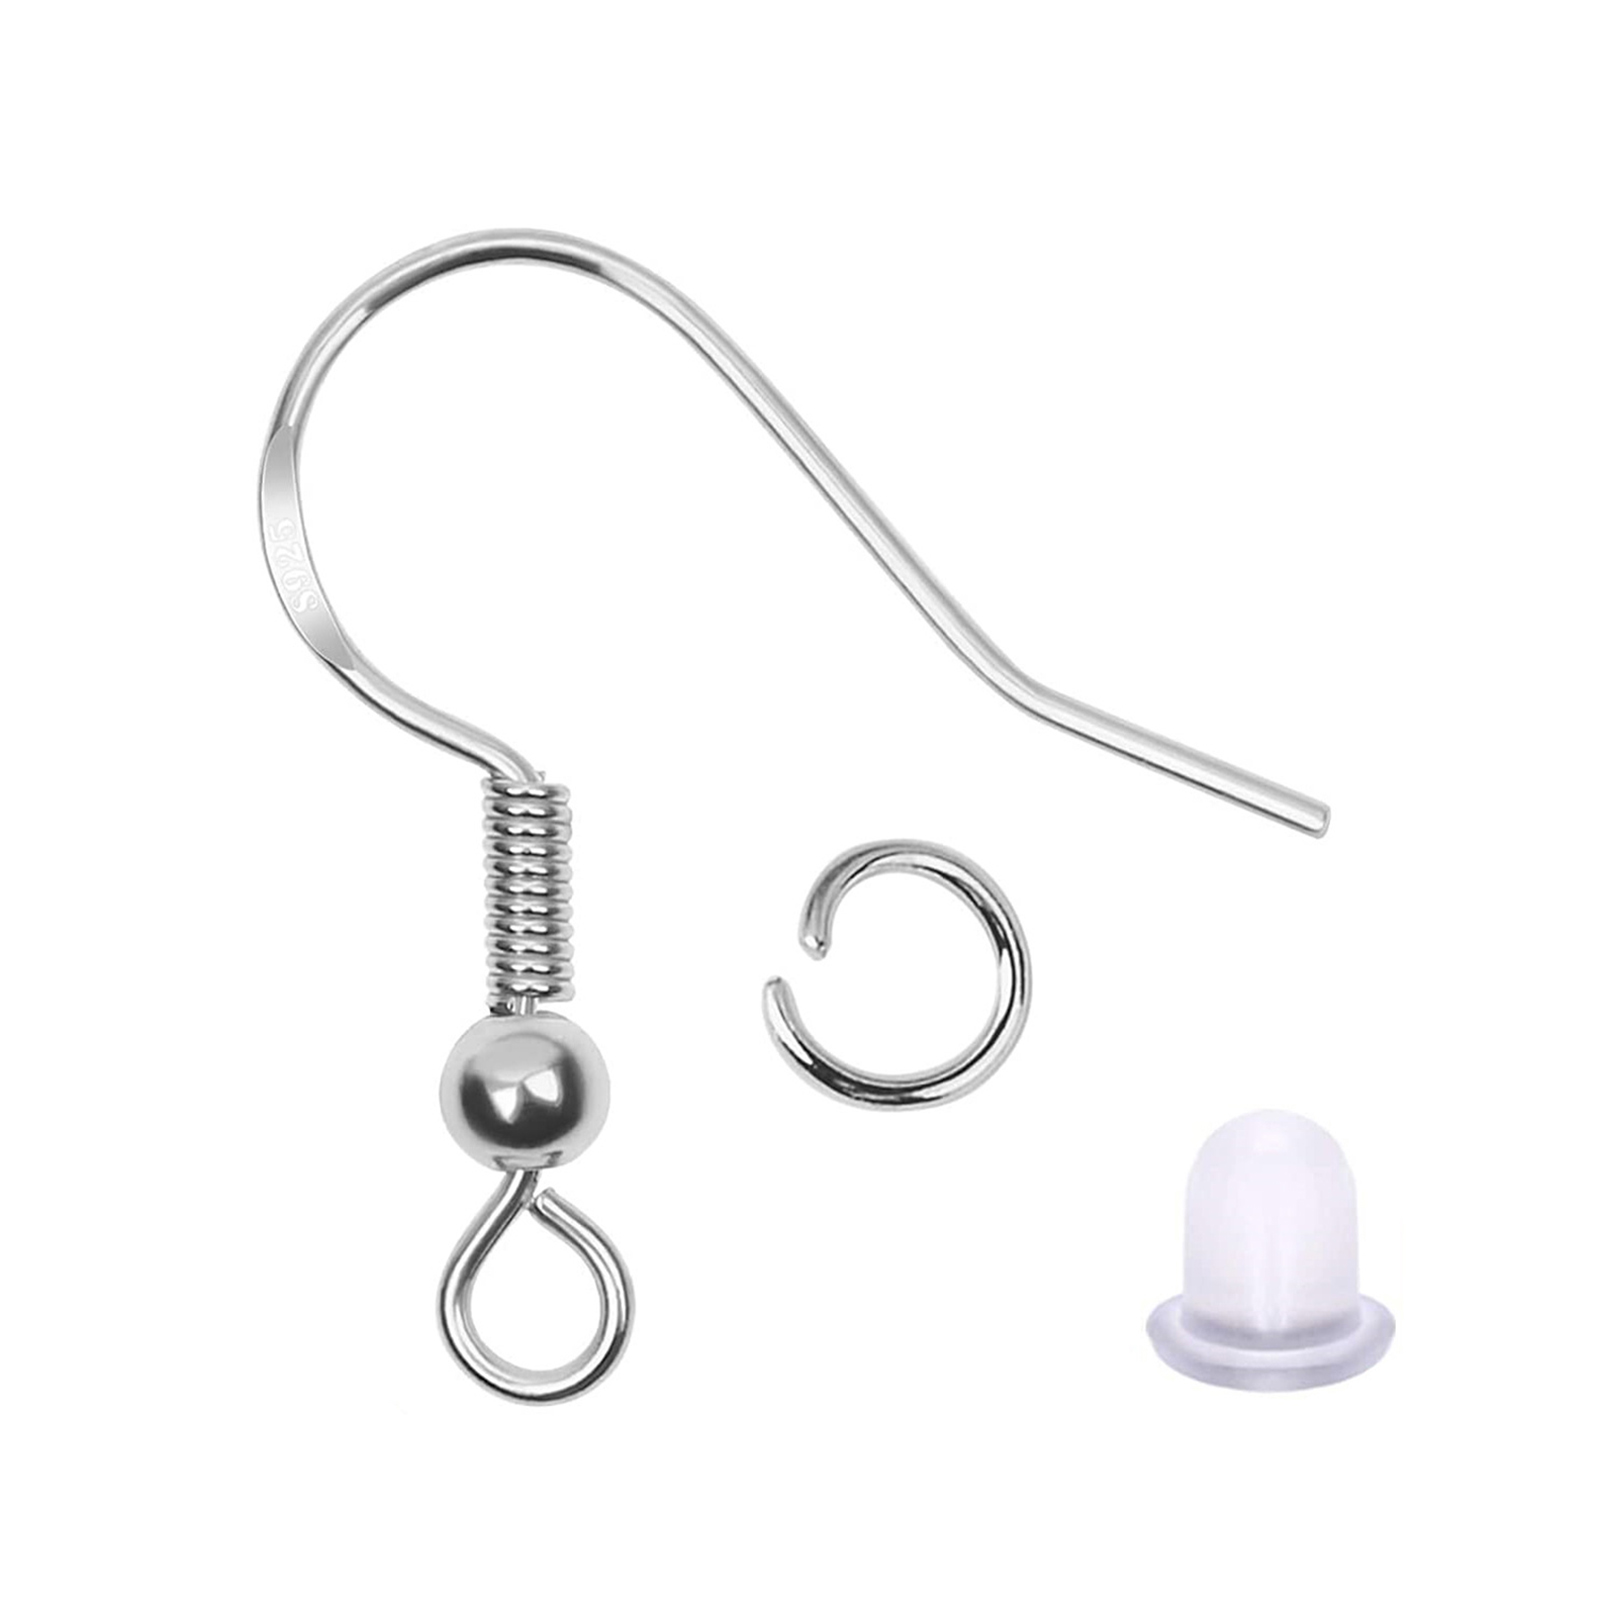 HGYCPP 100 PCS Hypo-allergenic Silver Plated Ear Hooks 150Pcs Earplugs 50Pcs Ear Pins - image 4 of 8